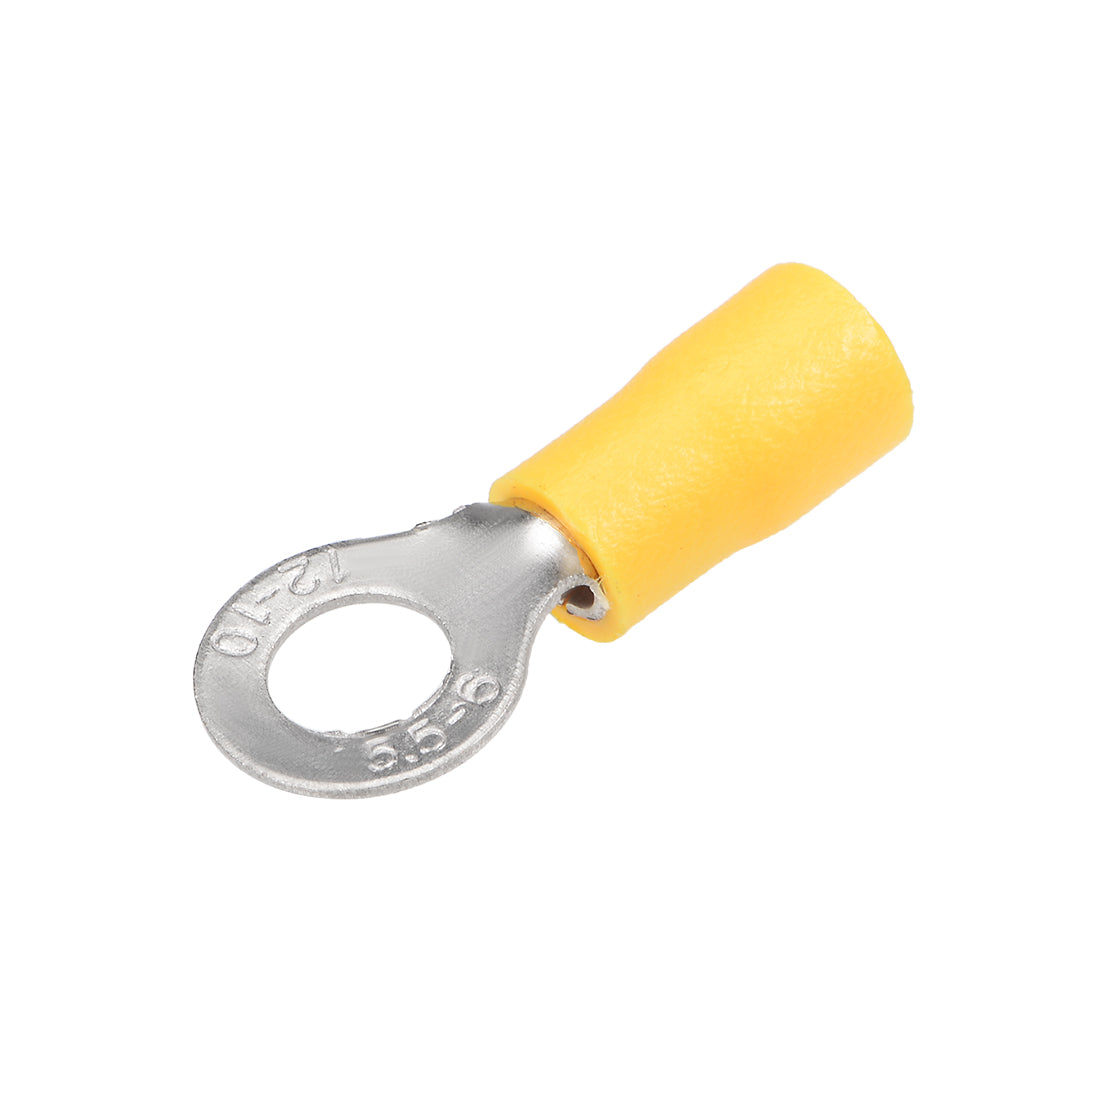 uxcell Uxcell RV5.5-6 Insulated Electrical Crimp Terminal, Ring Spade Wire Connector Yellow for AWG12-10